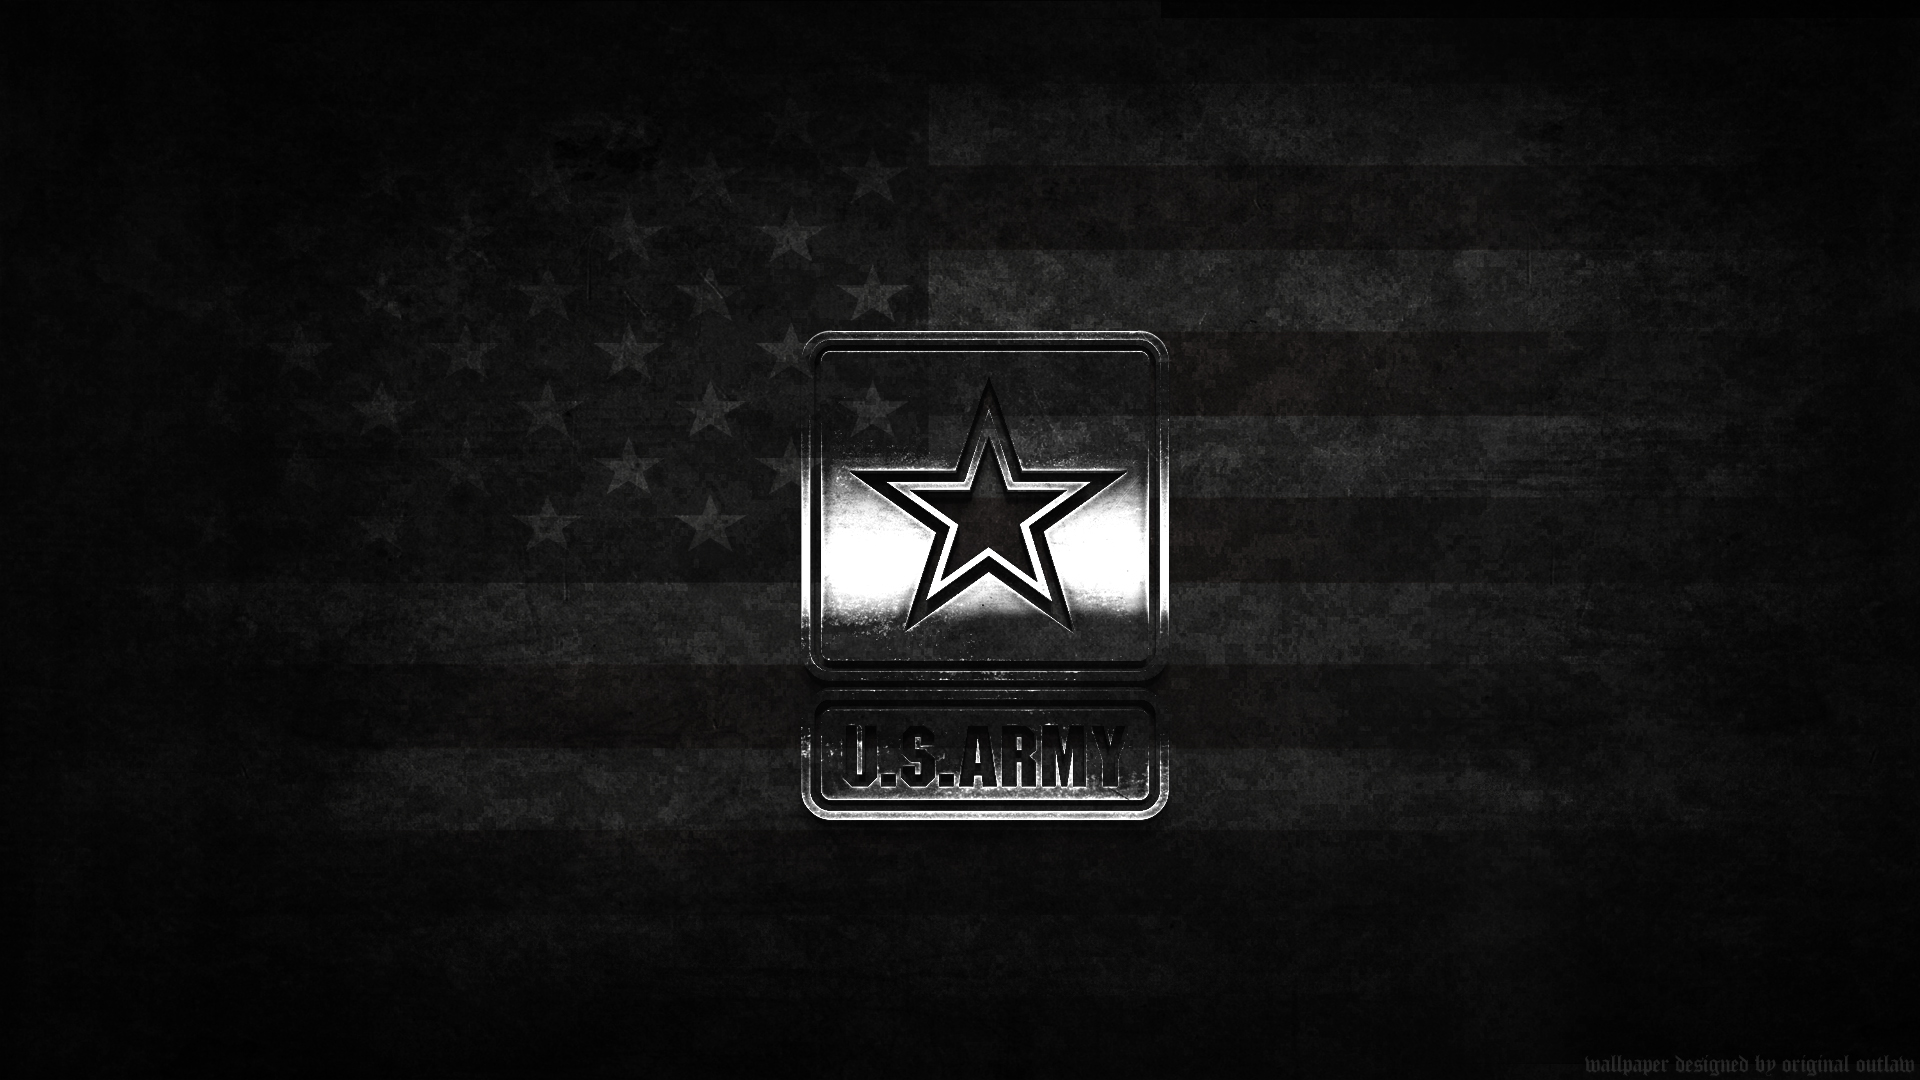 Us Army Backgrounds submited images